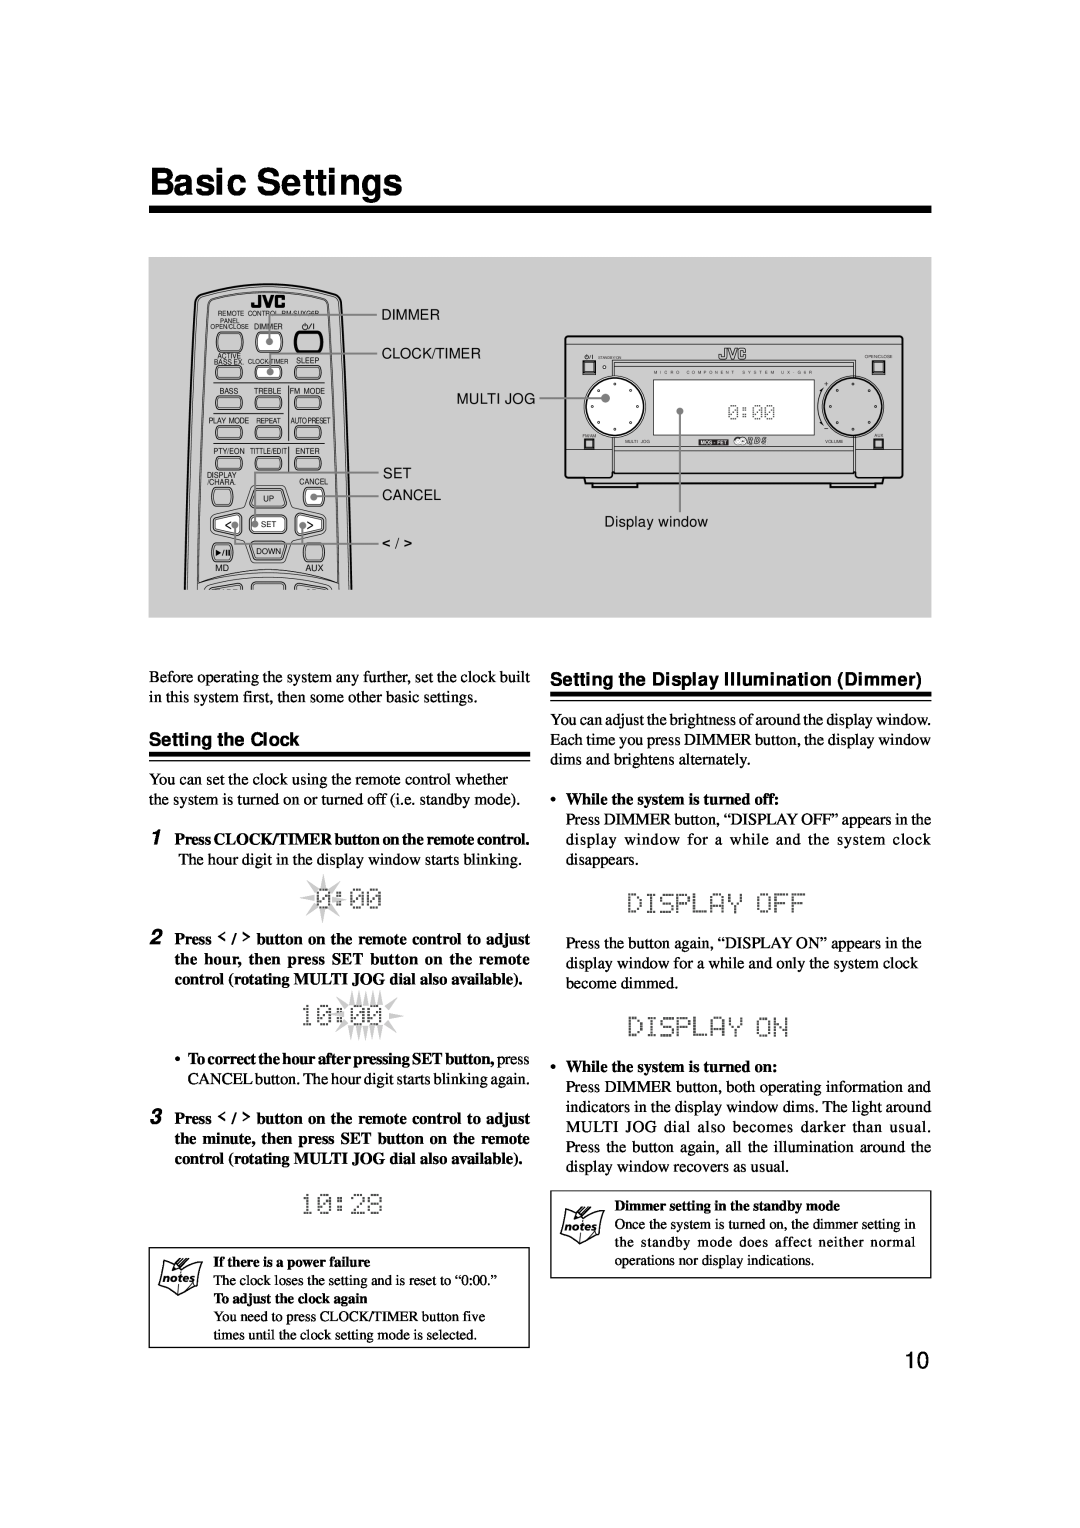 JVC AX-UXG6 Basic Settings, Setting the Clock, Setting the Display Illumination Dimmer, While the system is turned off 